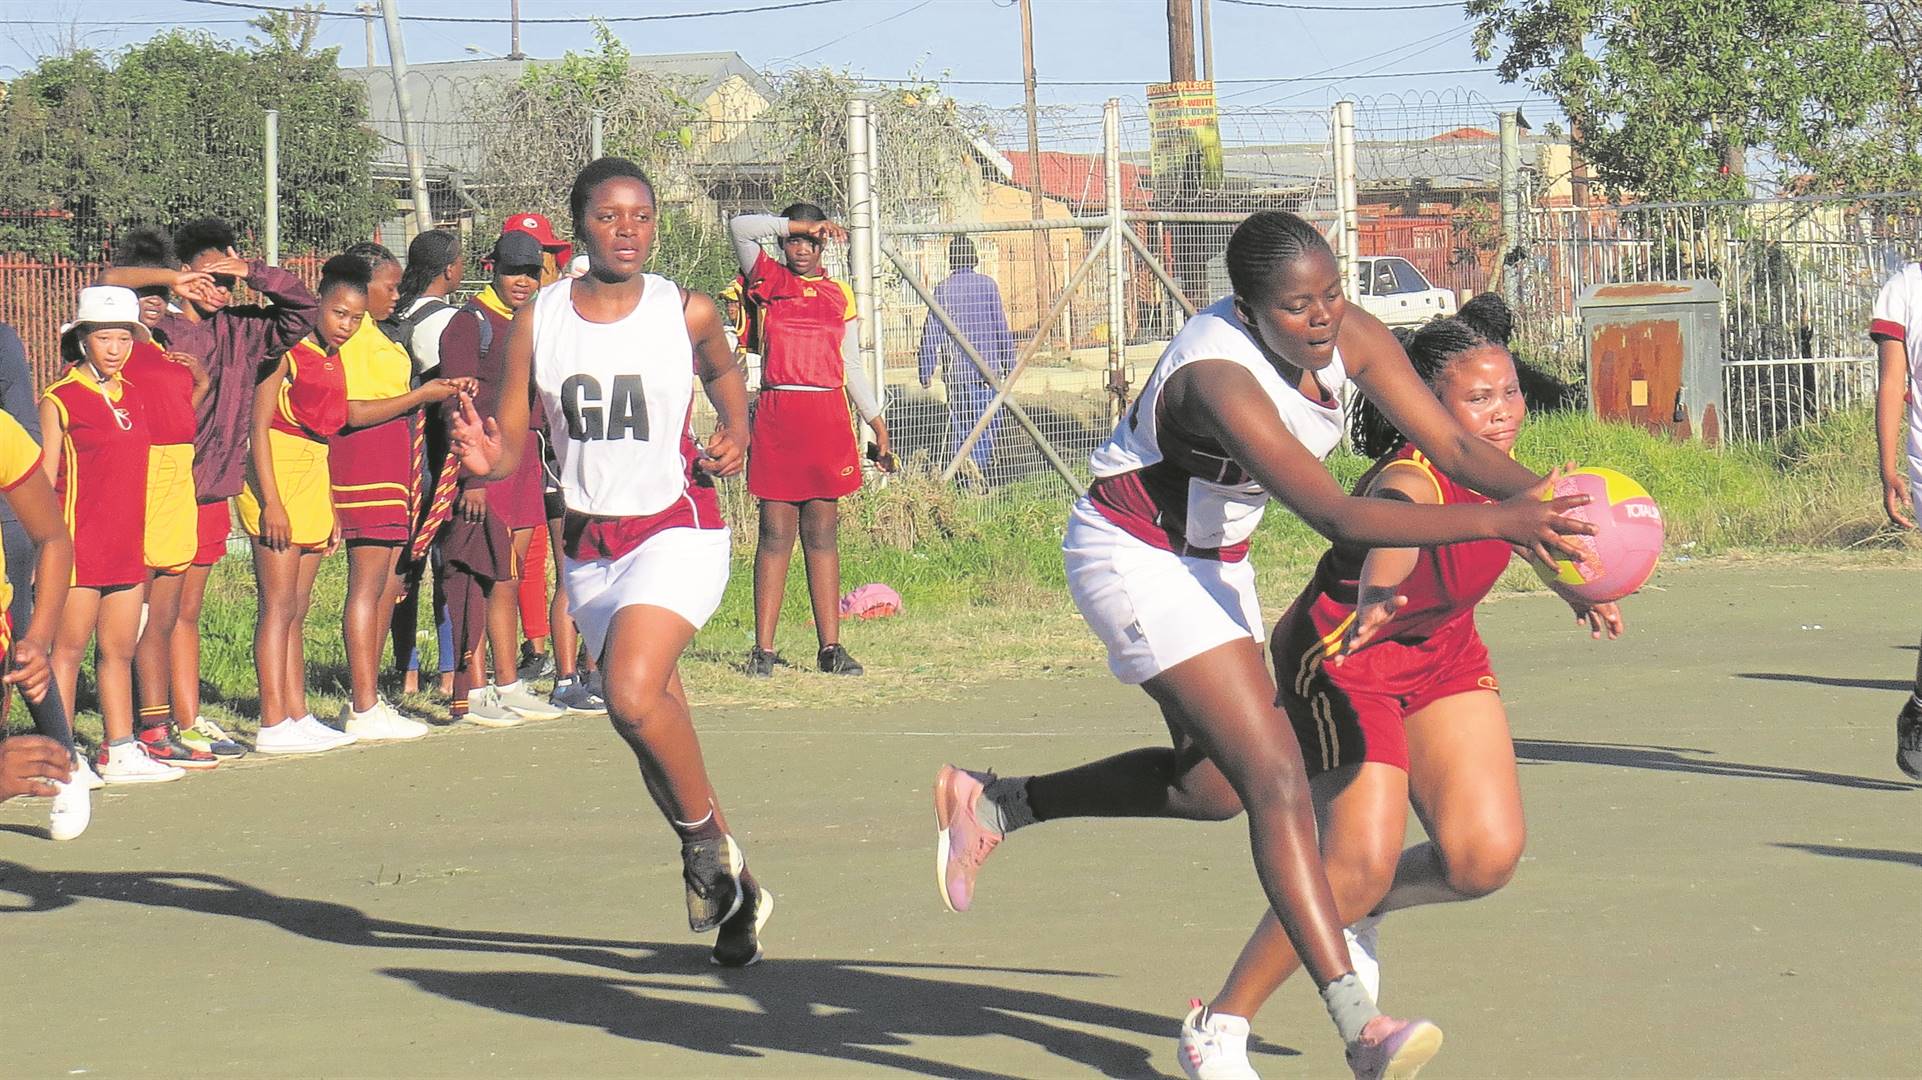 Nomathemba Khusela (left) of the Tsoseletso High School and Mantwa Sepalo of the Bainsvlei Combined School tussle for the ball while Refiloe van Wyk looks on. This league fixture, in which the latter school won by 11 – 9, was staged on Wednesday (11/05). Photo: Teboho Setena